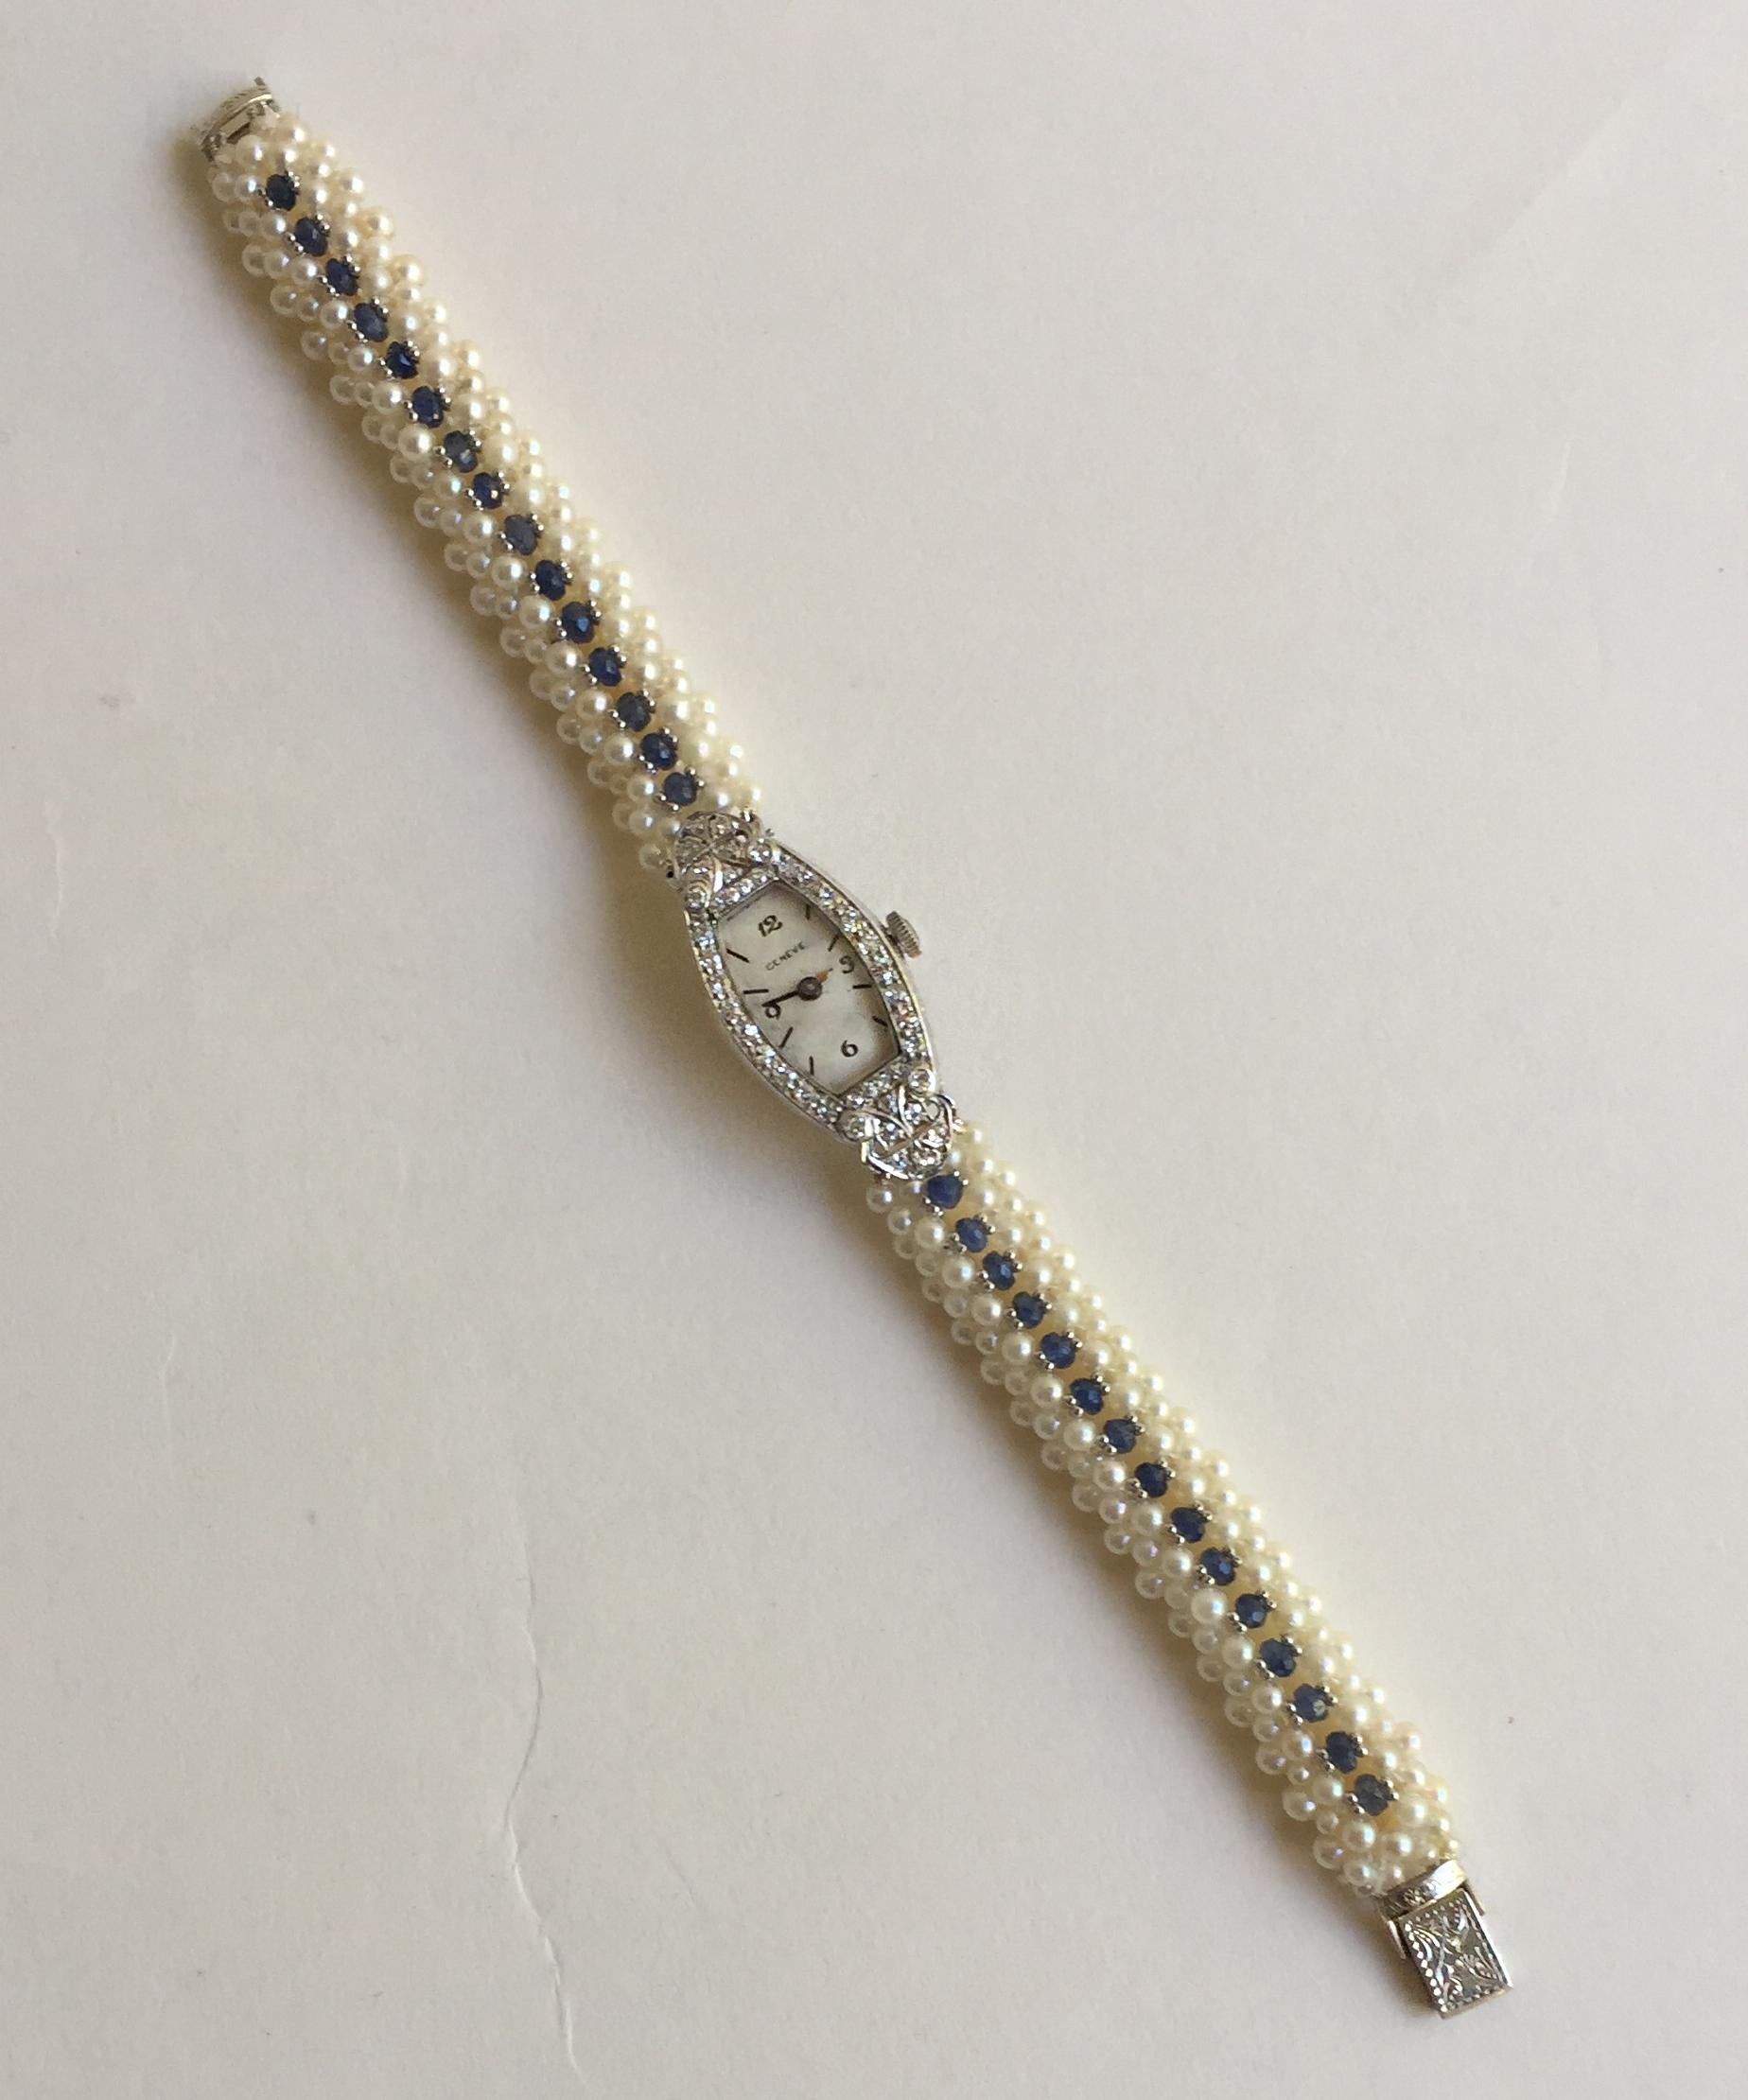 Artist Marina J Vintage Diamond Watch with Pearl and Sapphire Band and 14 K White Gold 